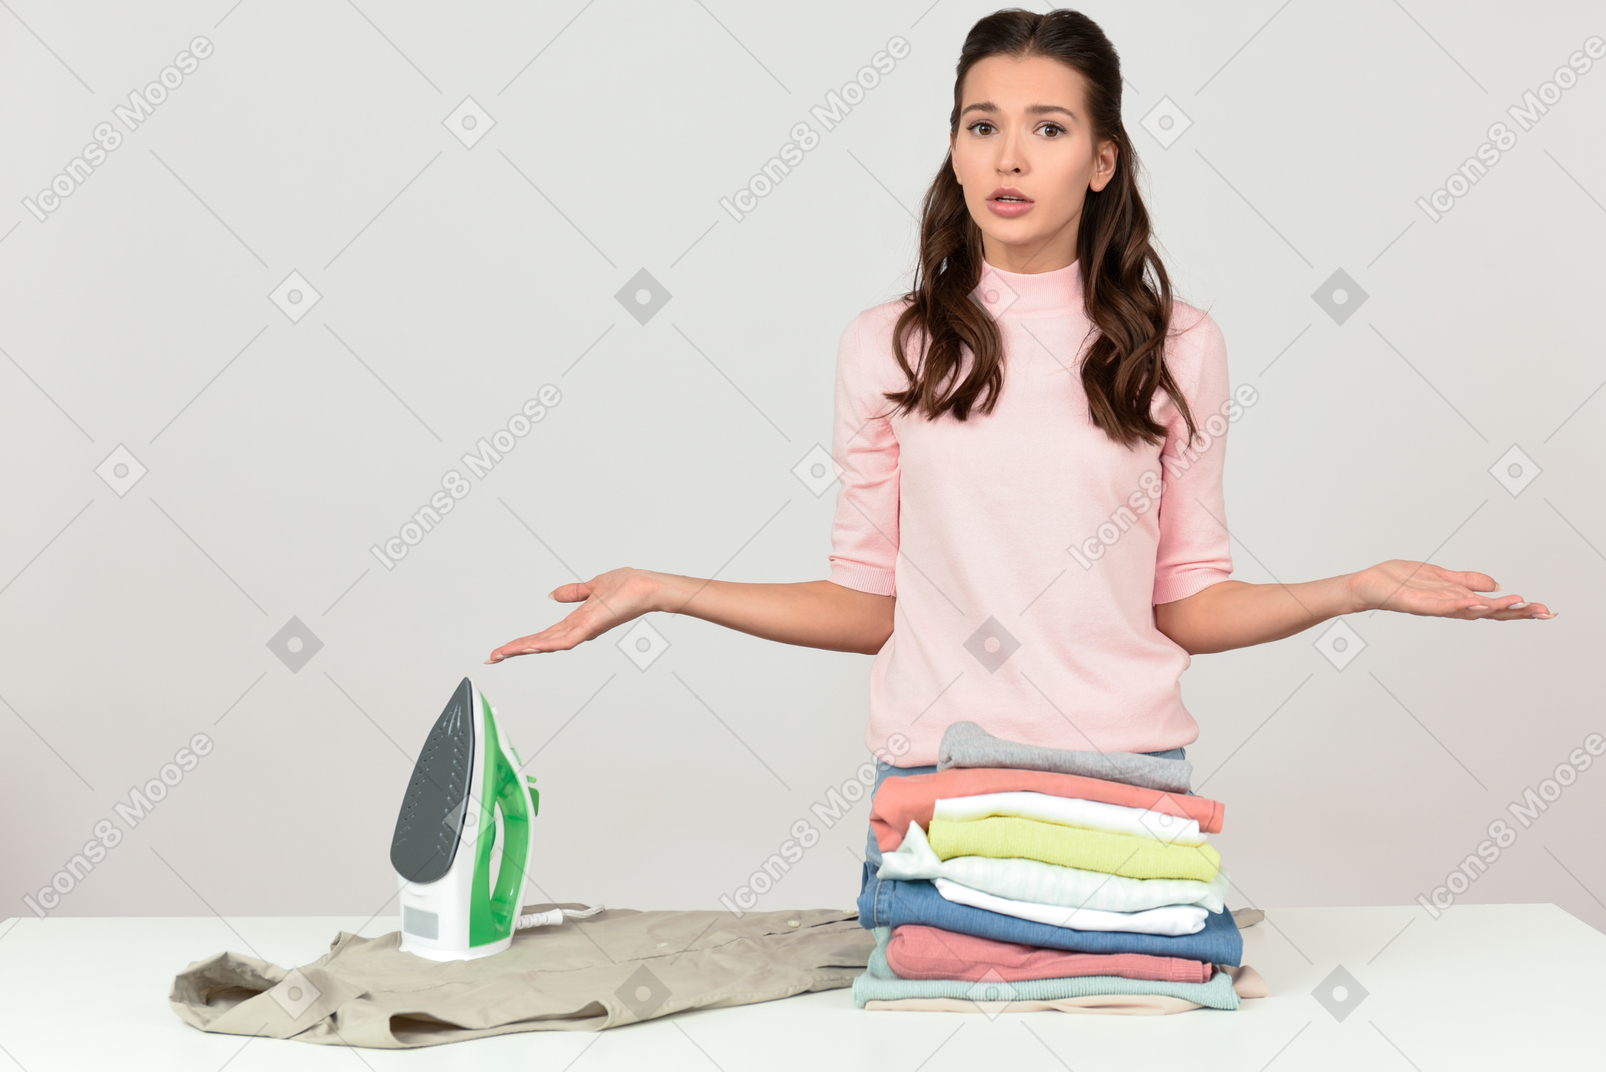 I don't understand why the ironing takes me all day long